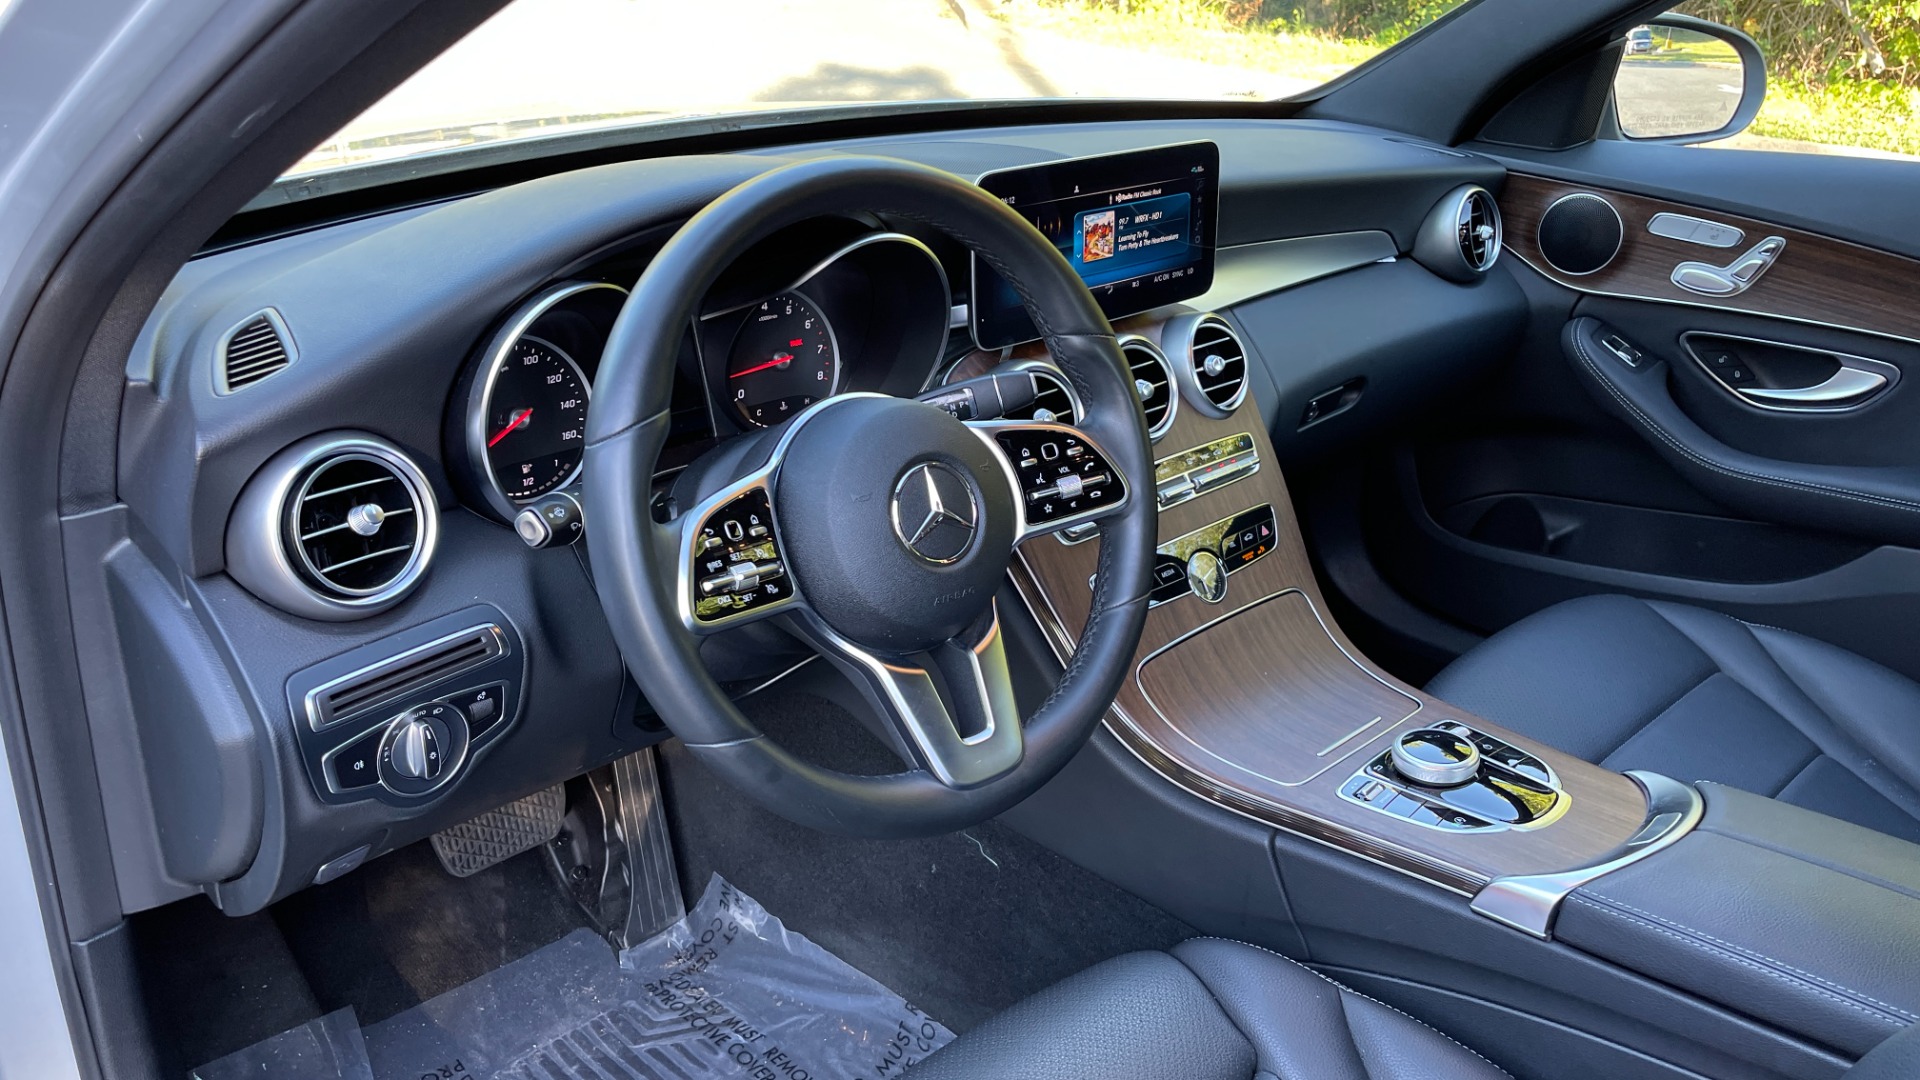 Used 2020 Mercedes-Benz C-Class C300 / BACKUP CAMERA / HEATED SEATS / WOOD GRAIN TRIM for sale $30,995 at Formula Imports in Charlotte NC 28227 10